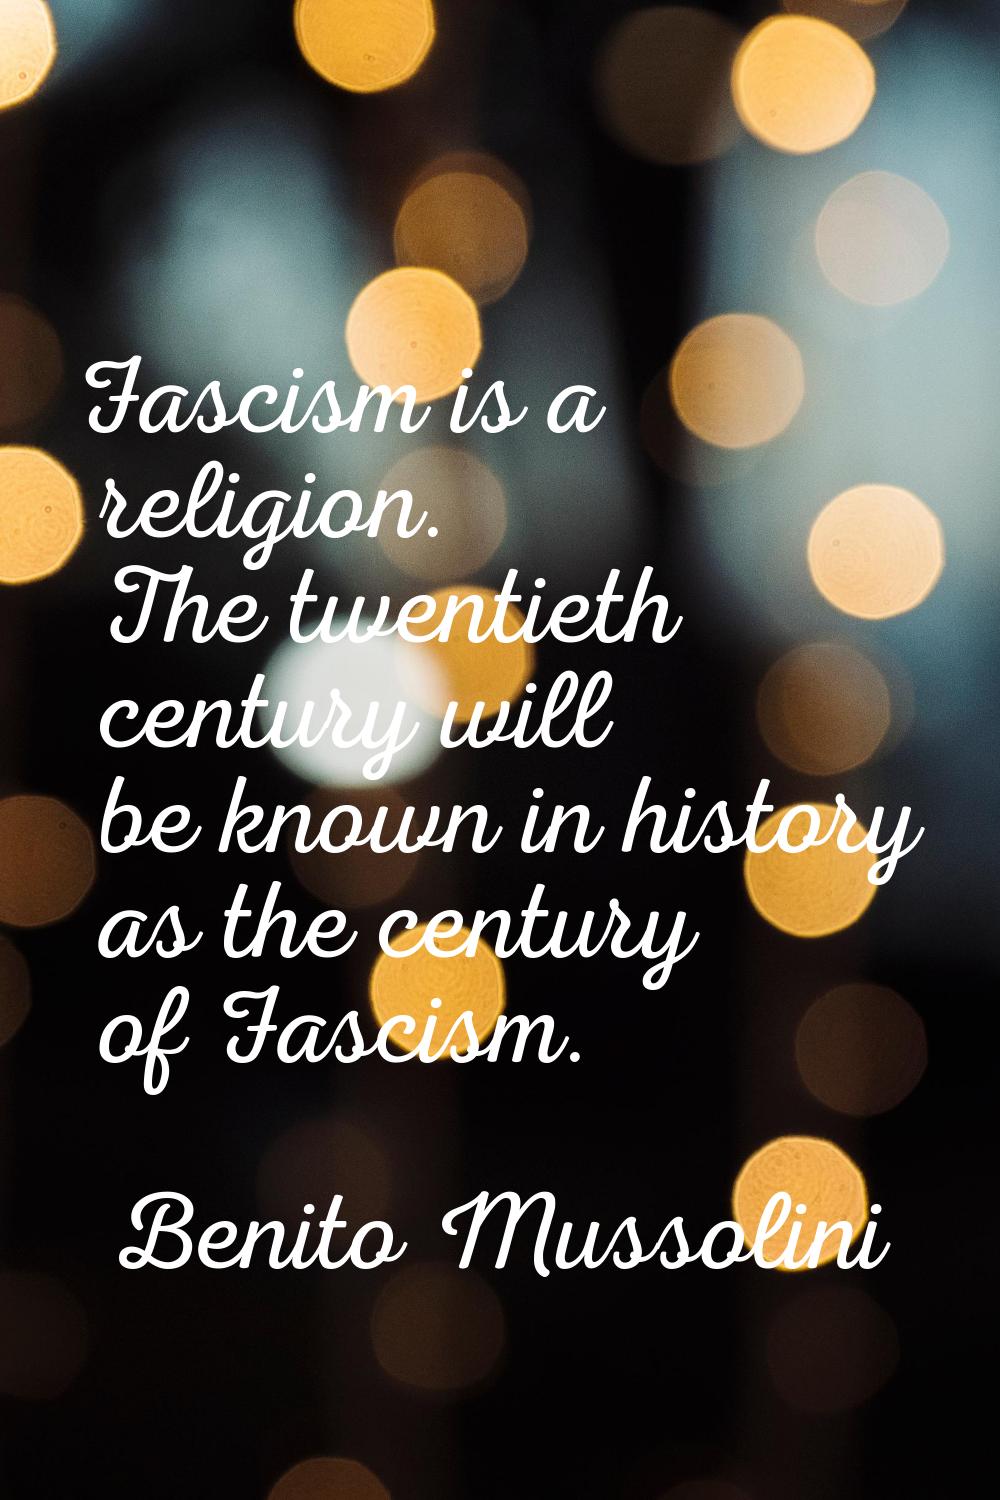 Fascism is a religion. The twentieth century will be known in history as the century of Fascism.